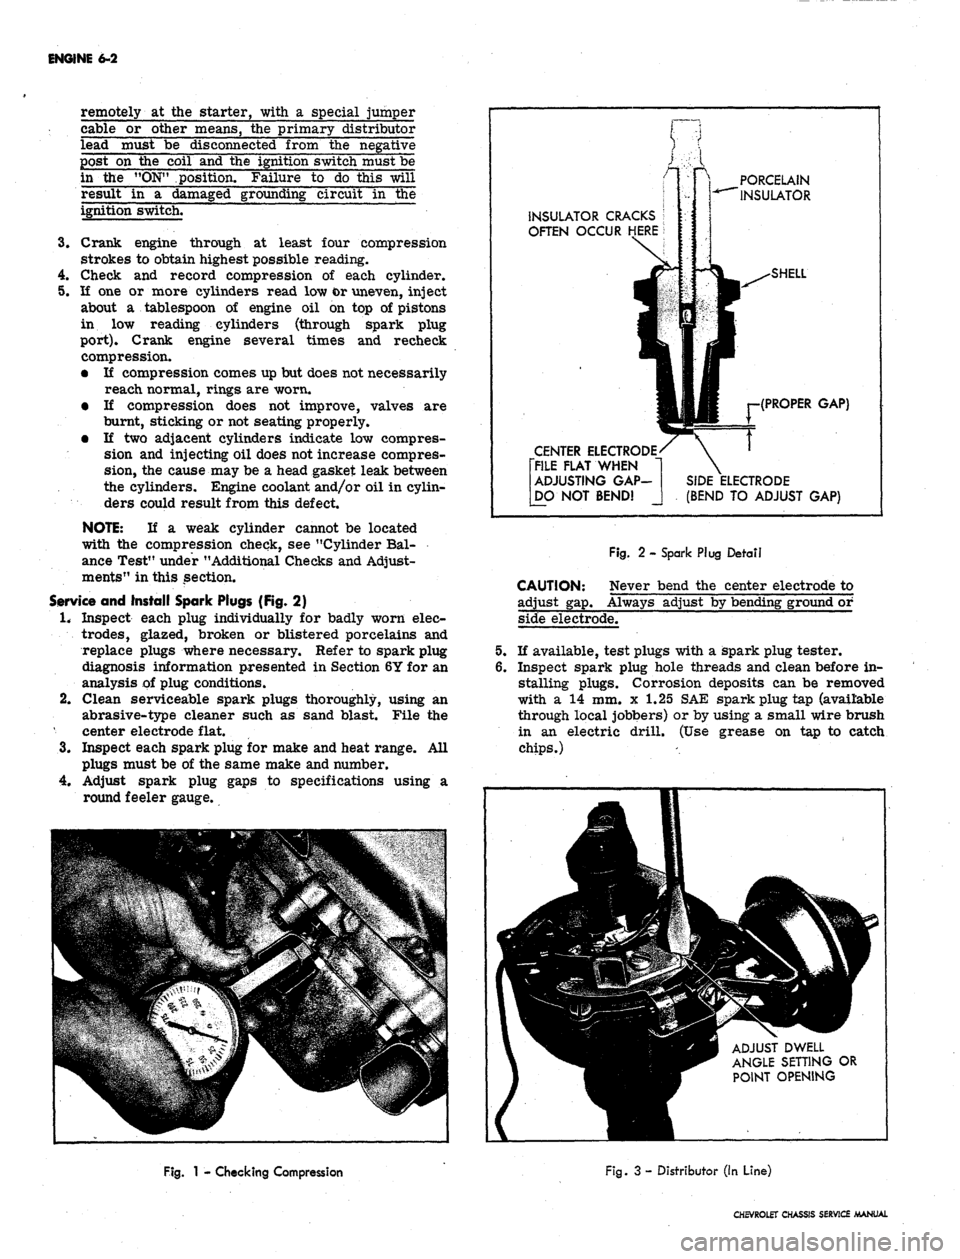 CHEVROLET CAMARO 1967 1.G Chassis Workshop Manual 
ENGINE 6-2

remotely at the starter, with a special jumper

cable or other means, the primary distributor

lead must be disconnected from the negative

post on the coil and the ignition switch must b